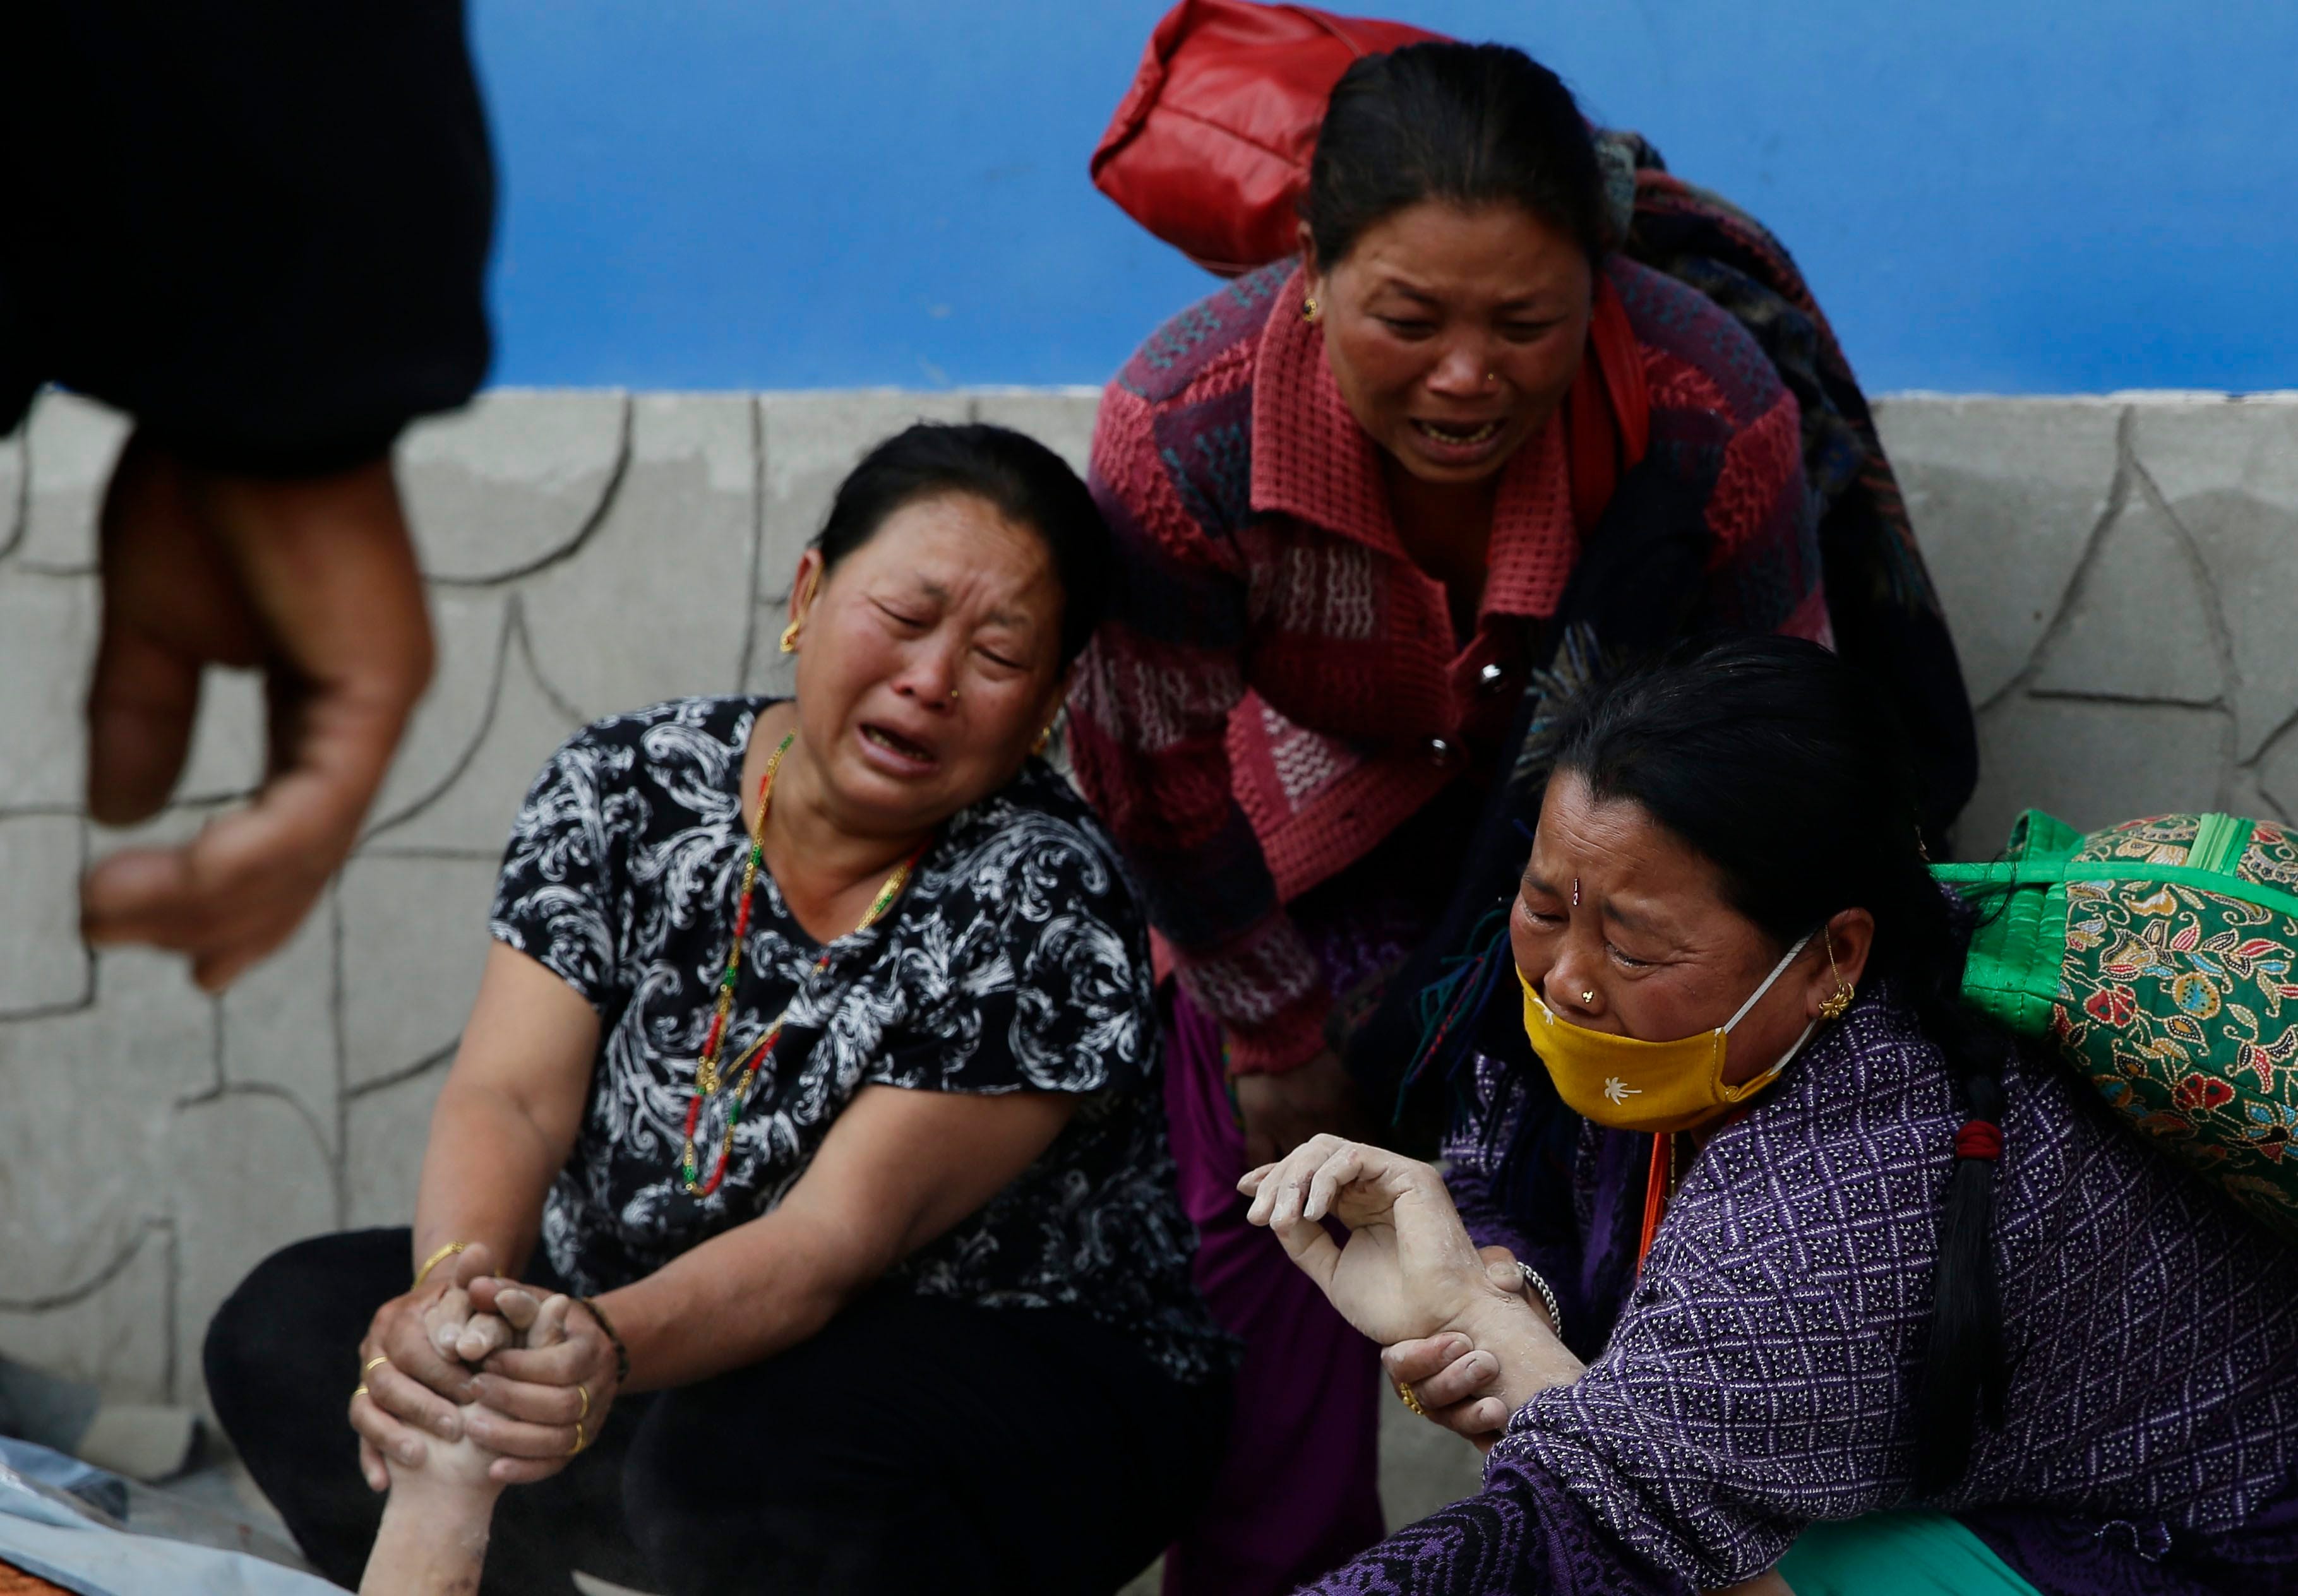 Death toll in Nepal surges amid hunt for survivors